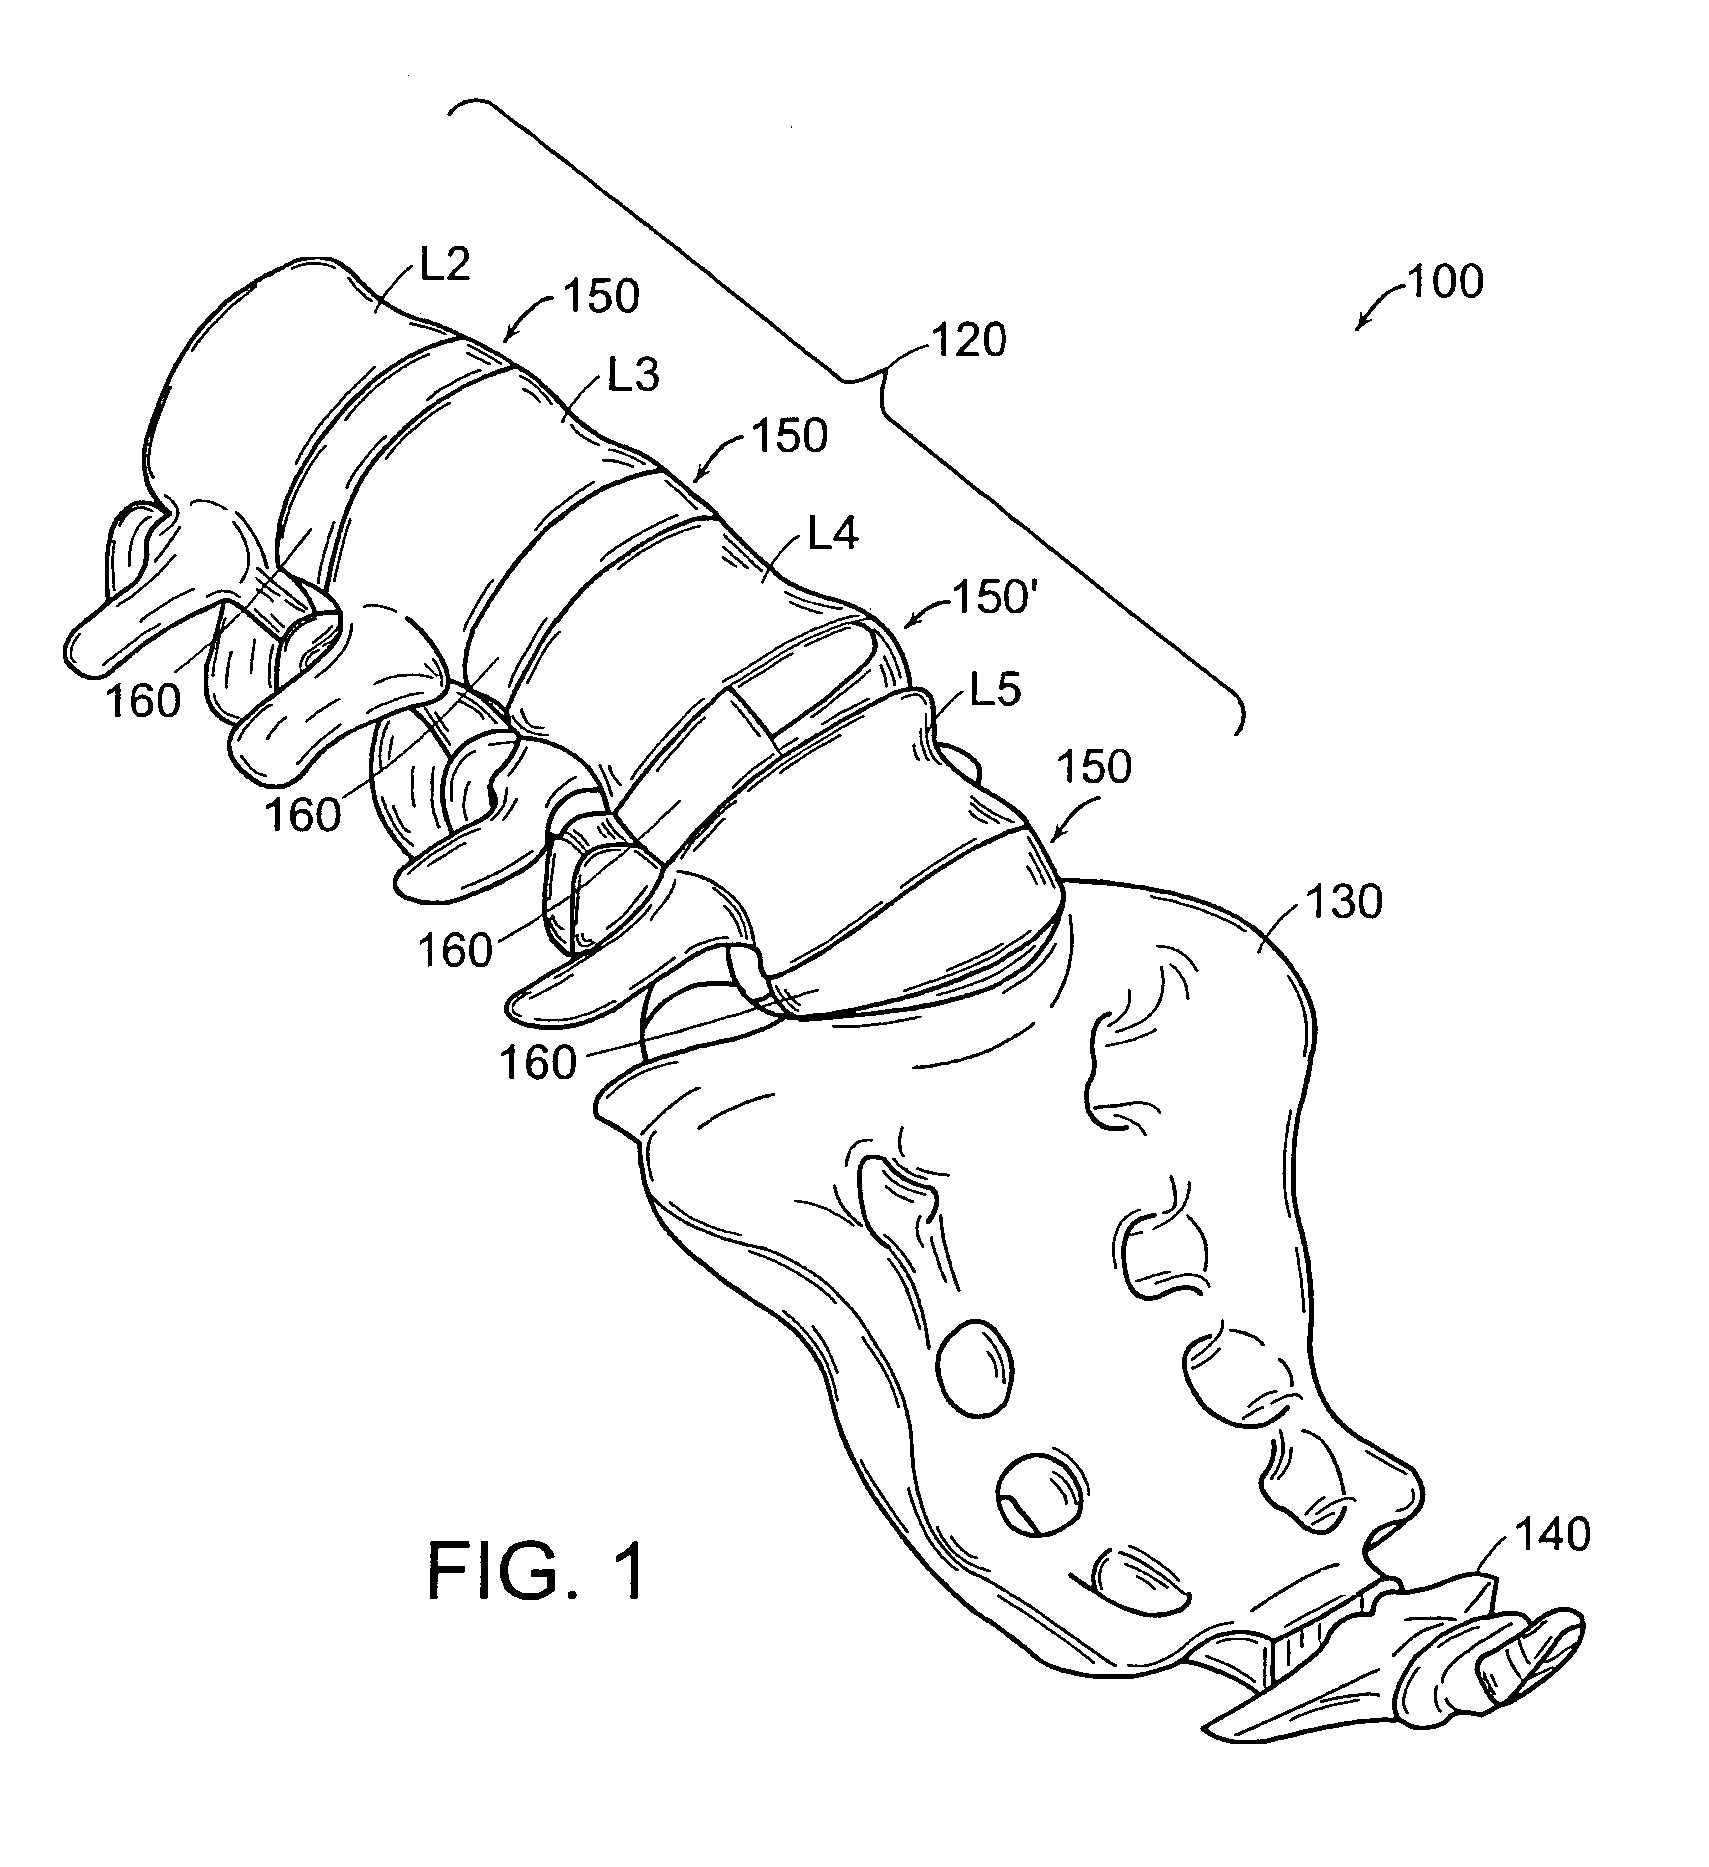 Method and apparatus for implant stability